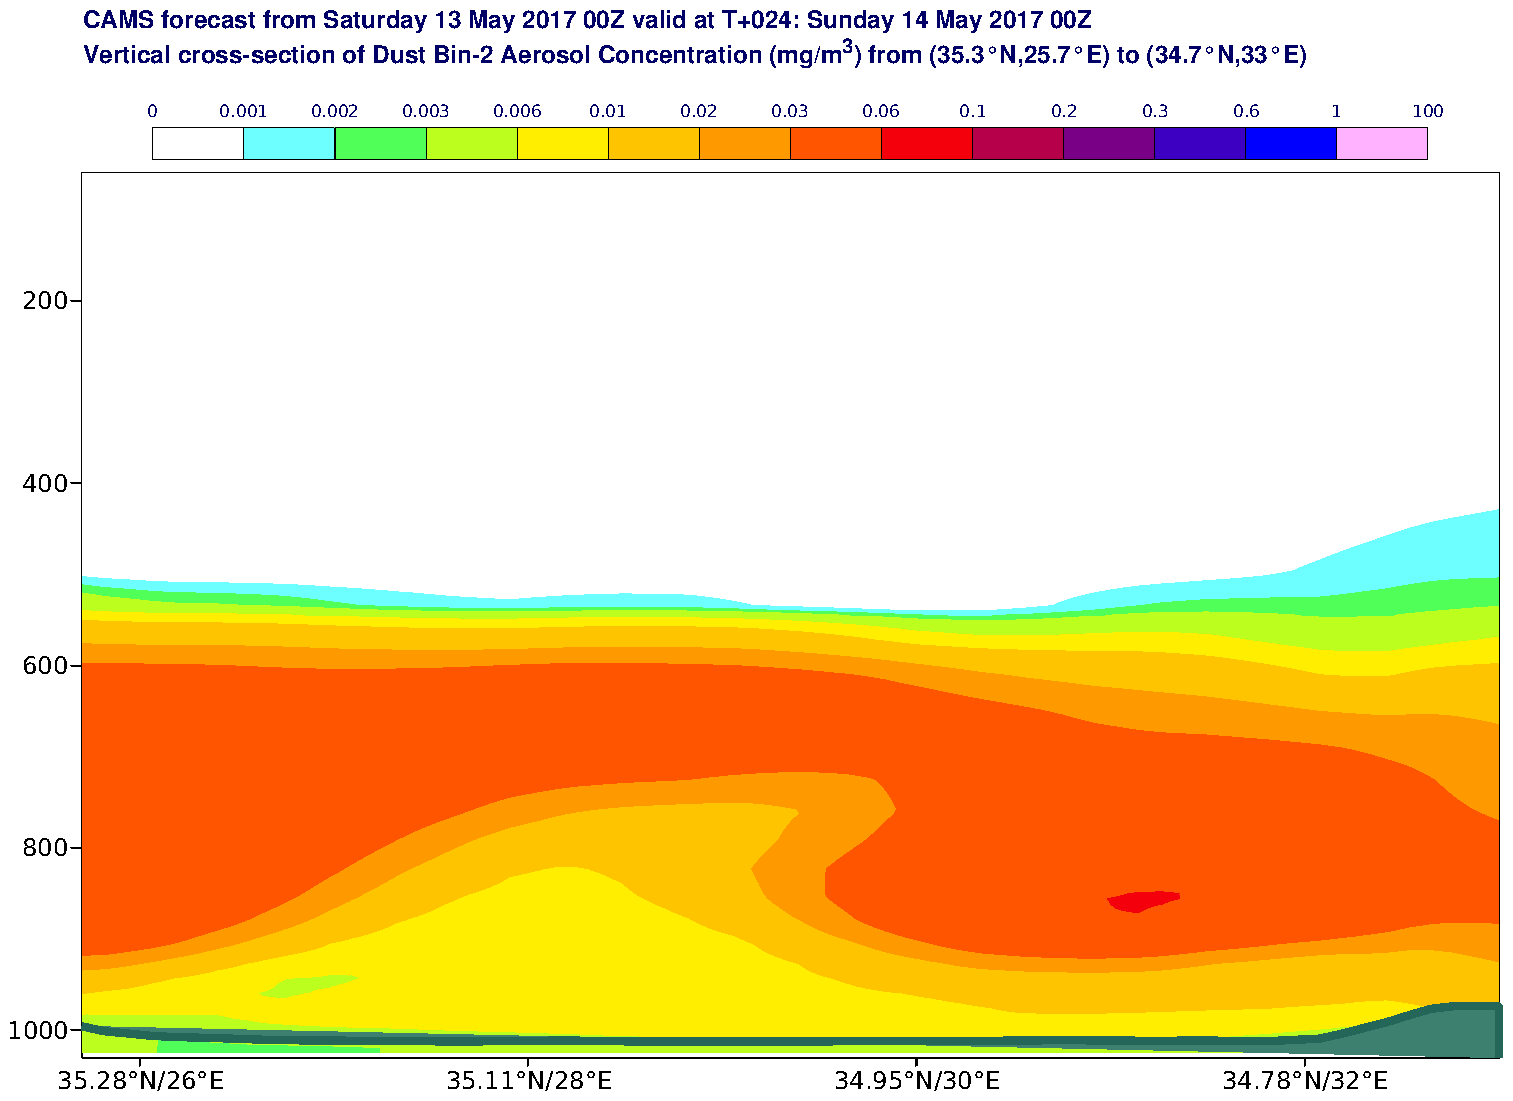 Vertical cross-section of Dust Bin-2 Aerosol Concentration (mg/m3) valid at T24 - 2017-05-14 00:00